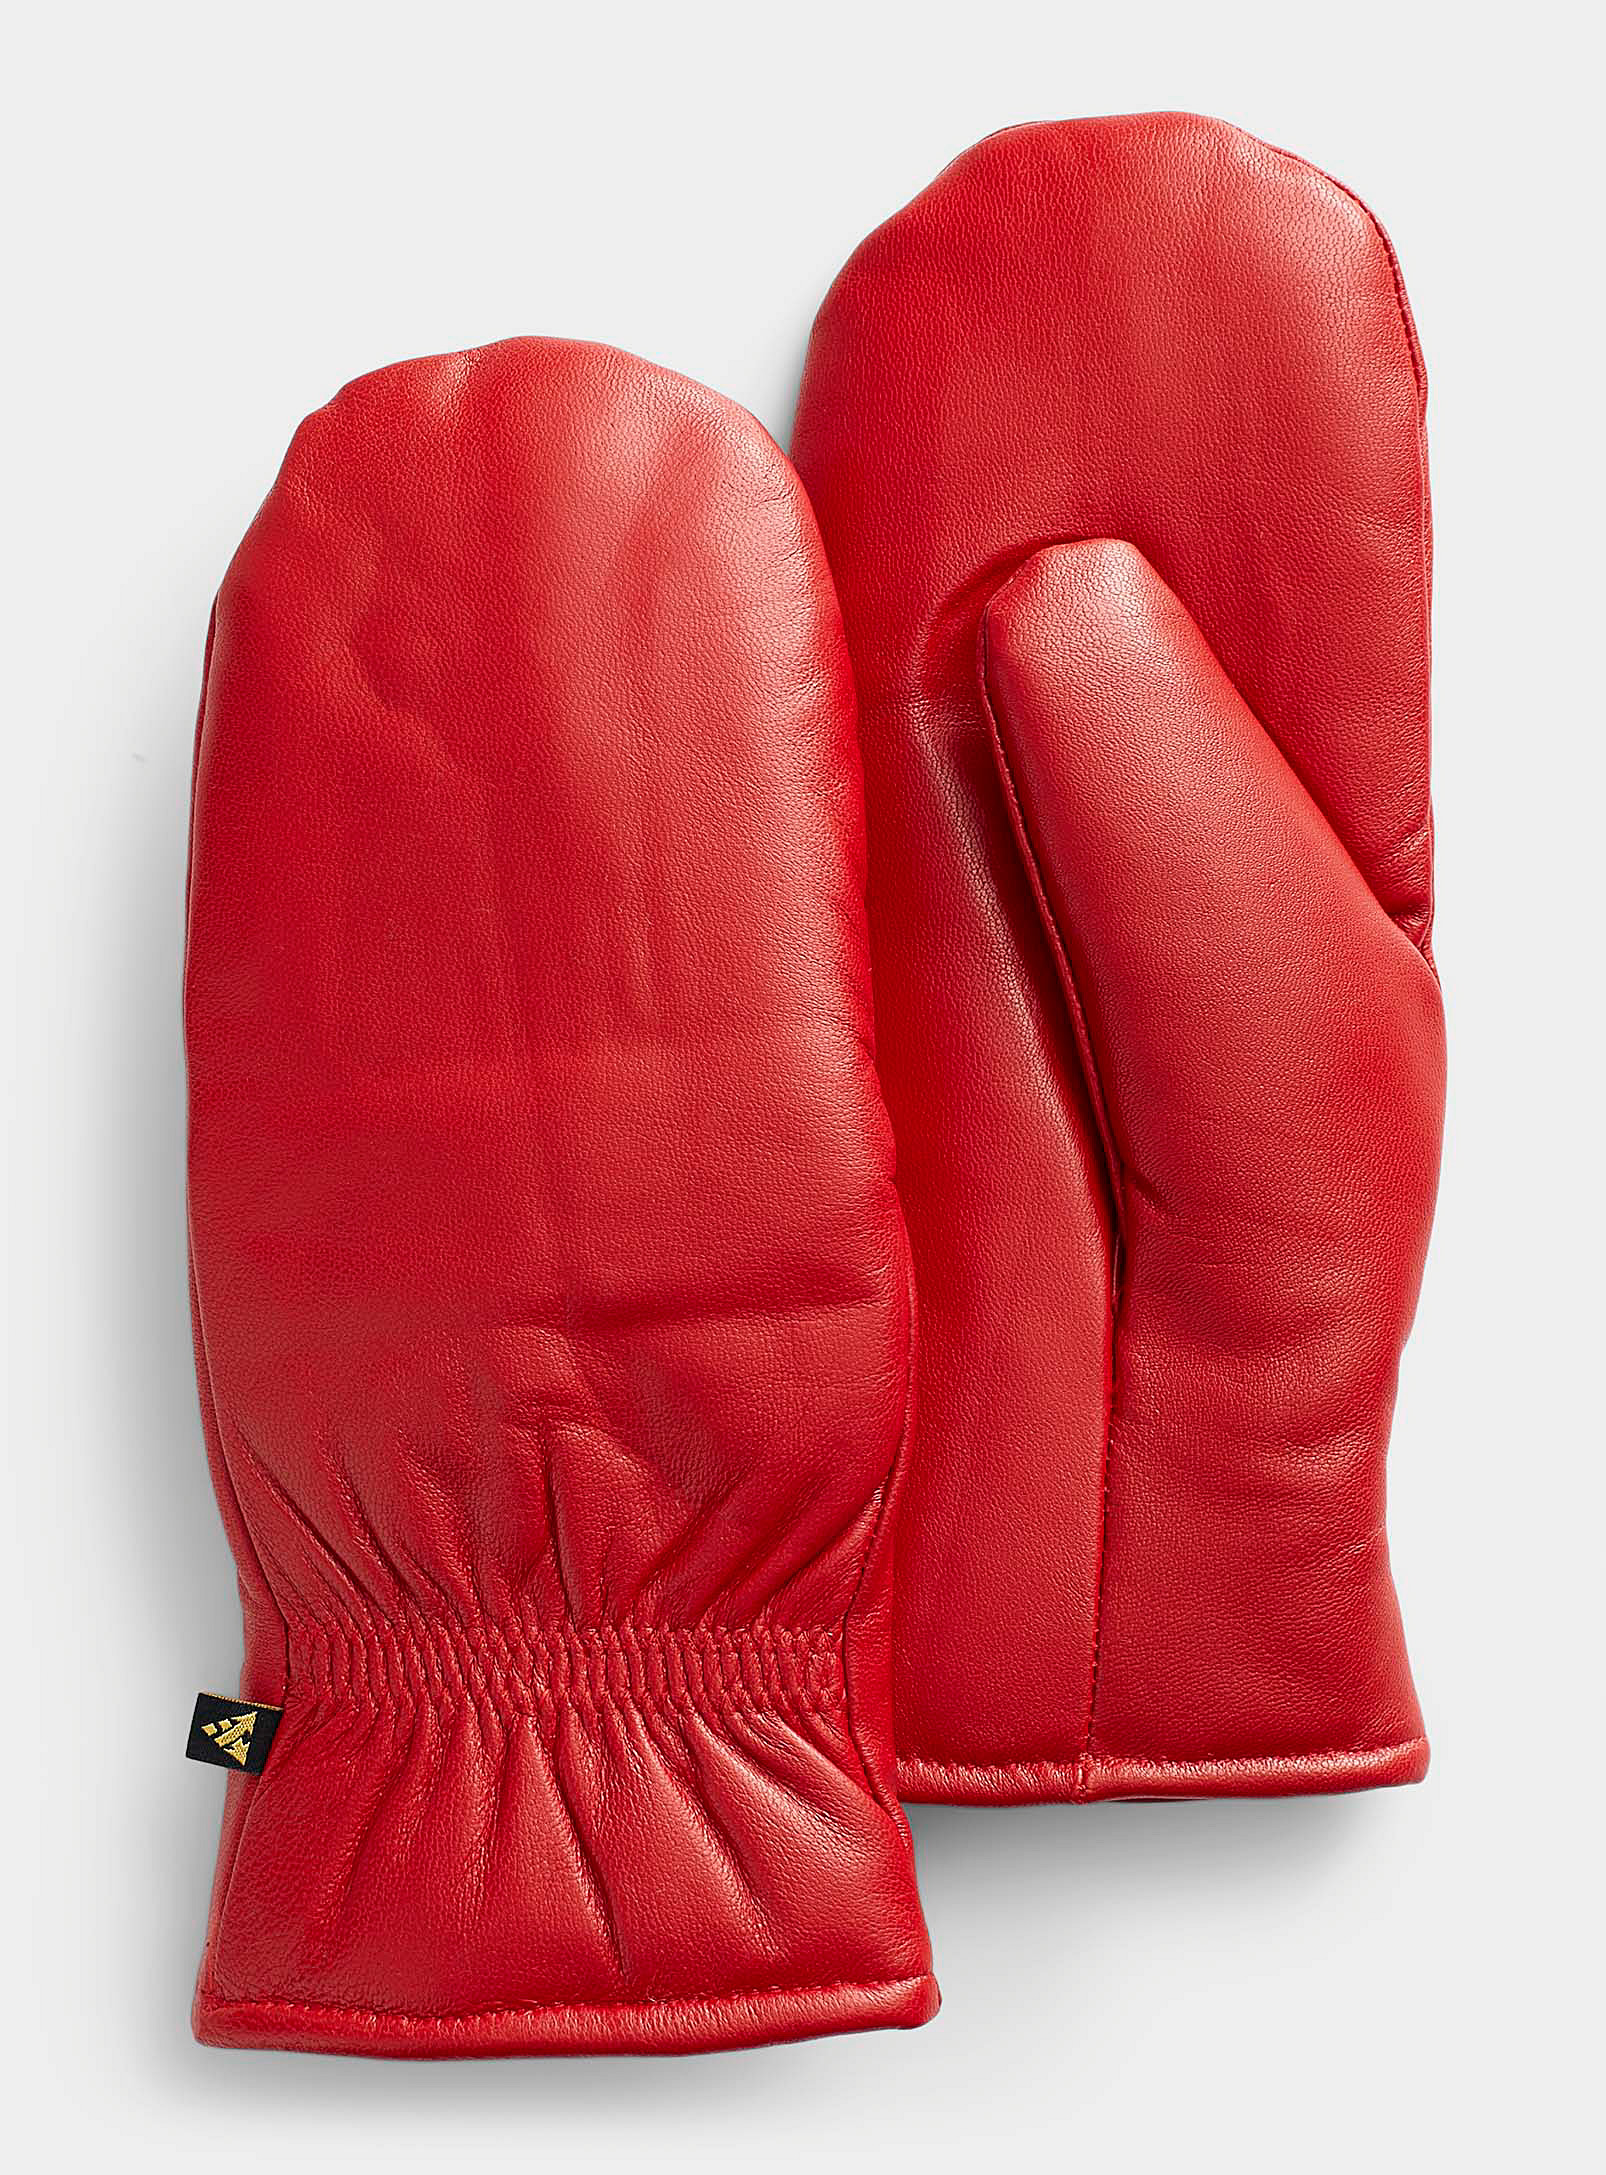 Auclair Smooth Leather Insulated Mittens In Bright Red